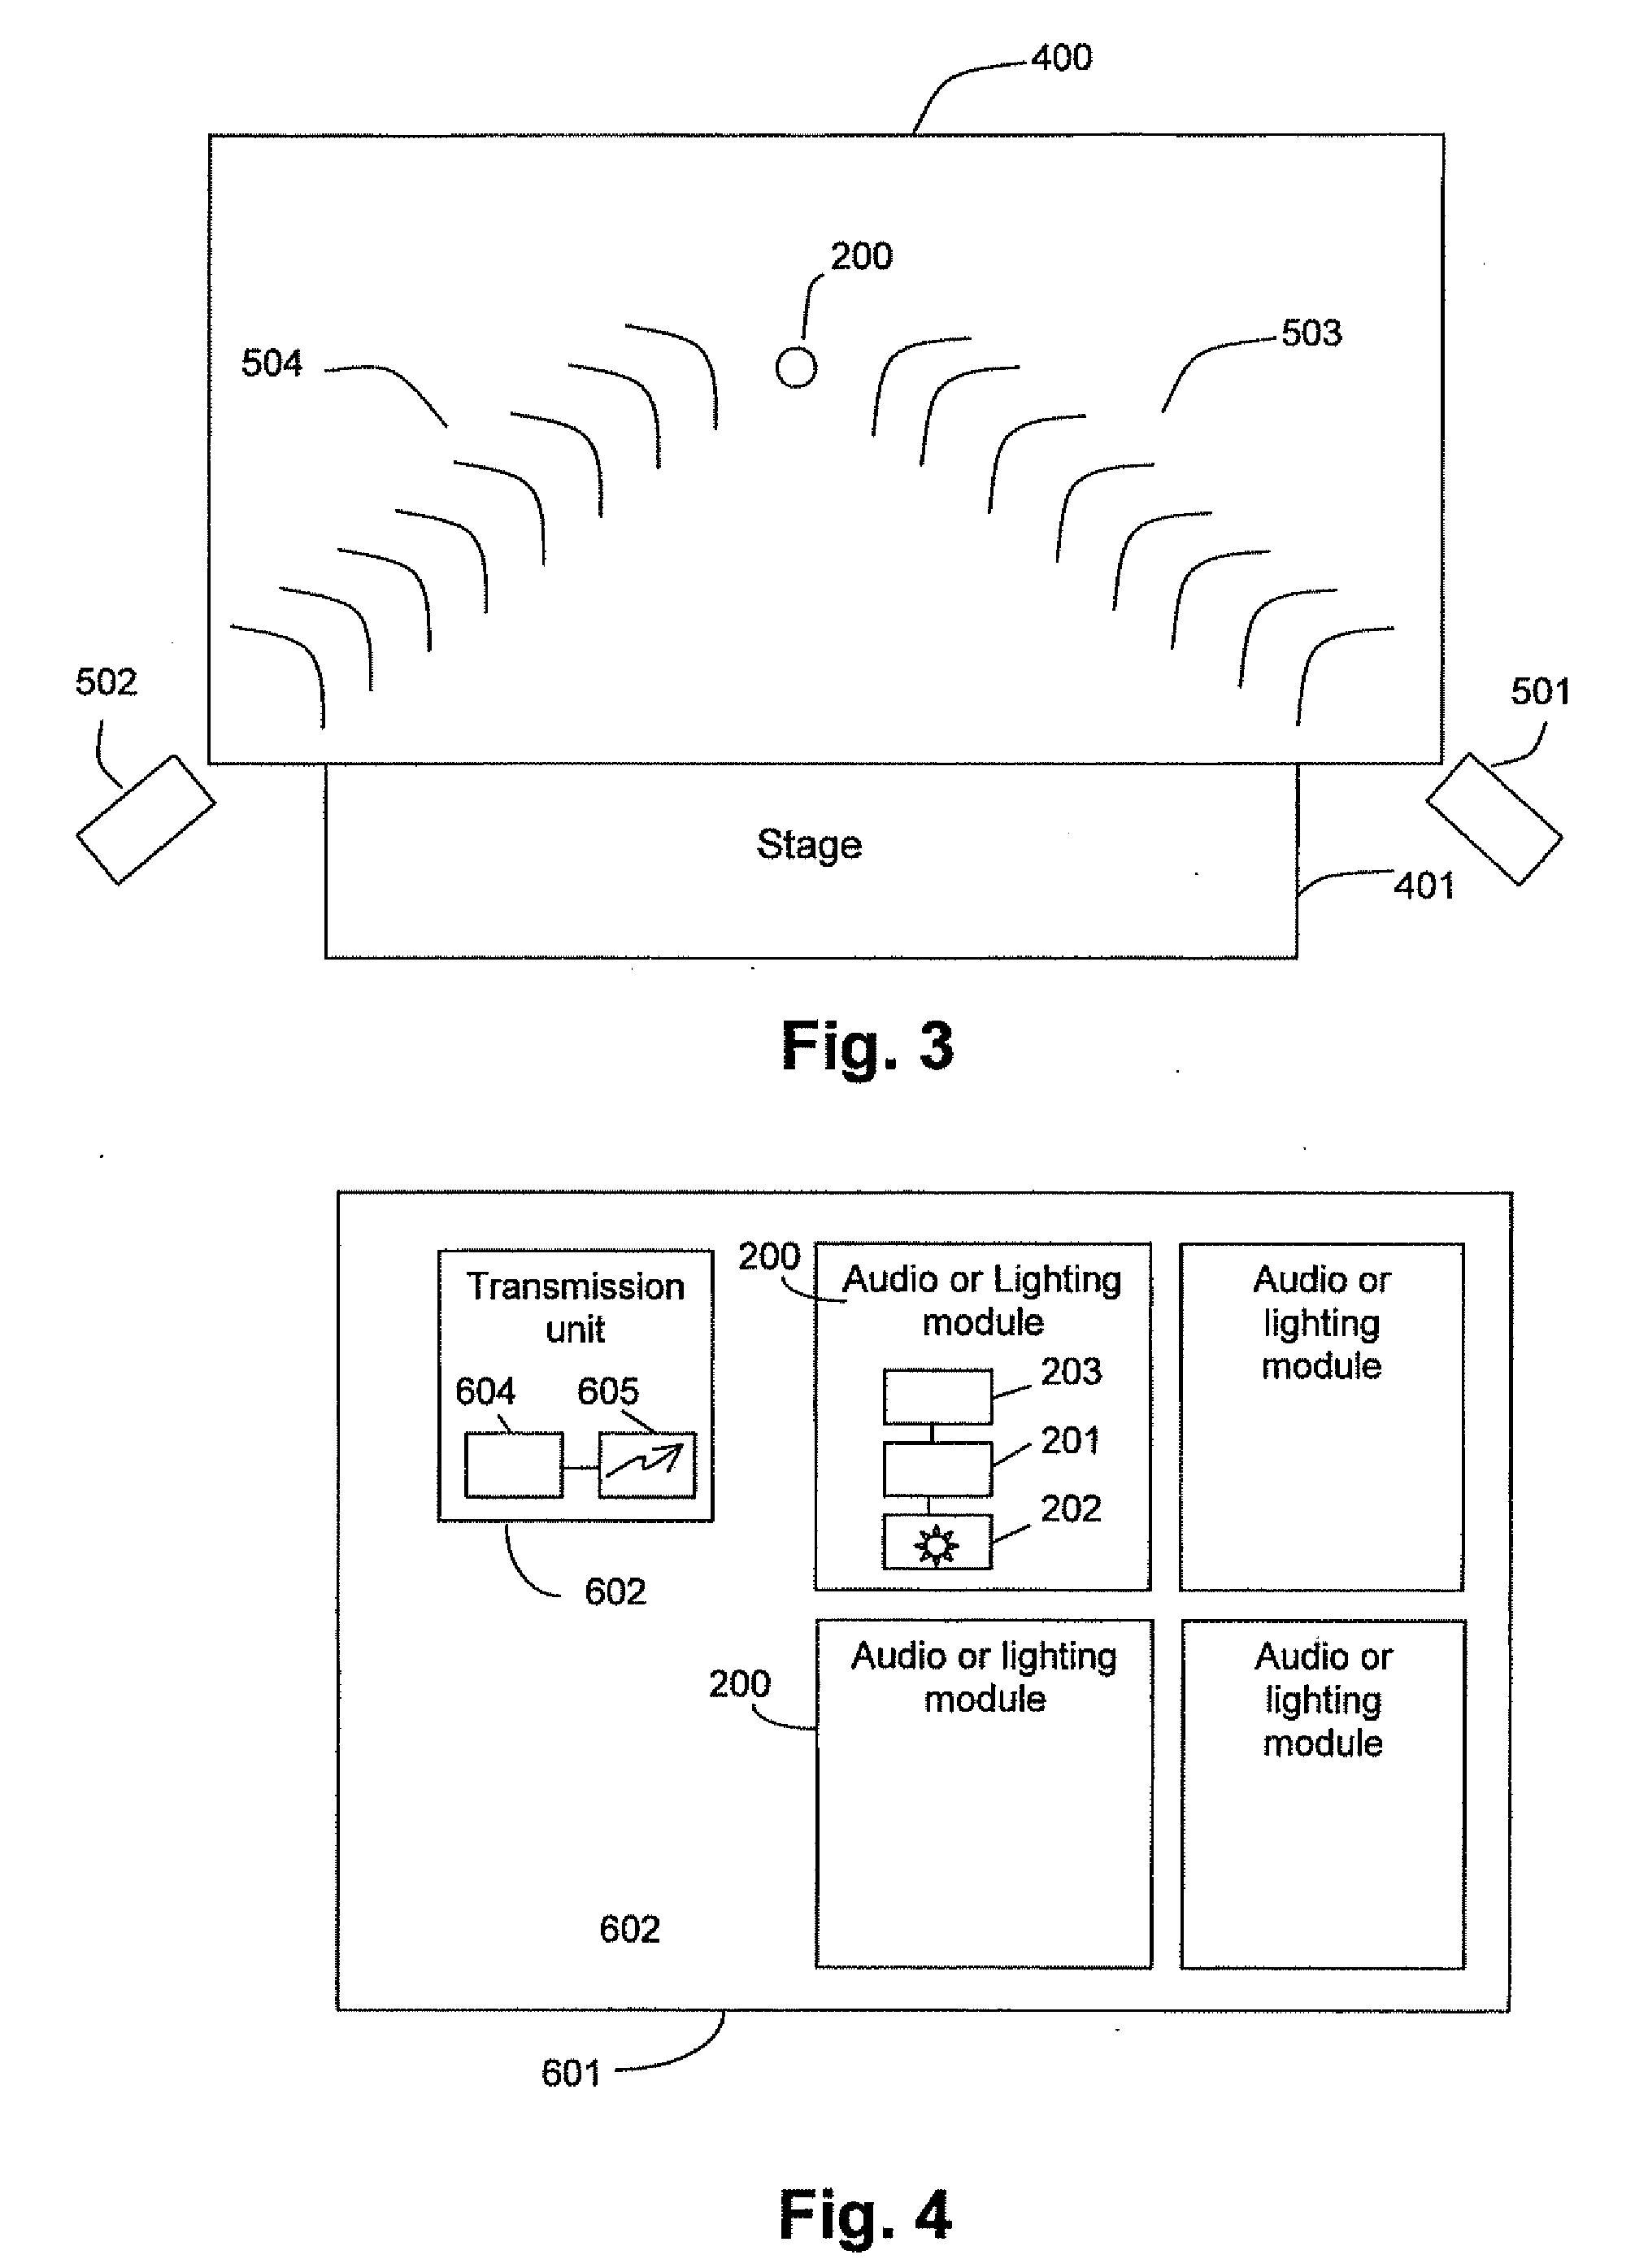 Method and device for providing auditory or visual effects